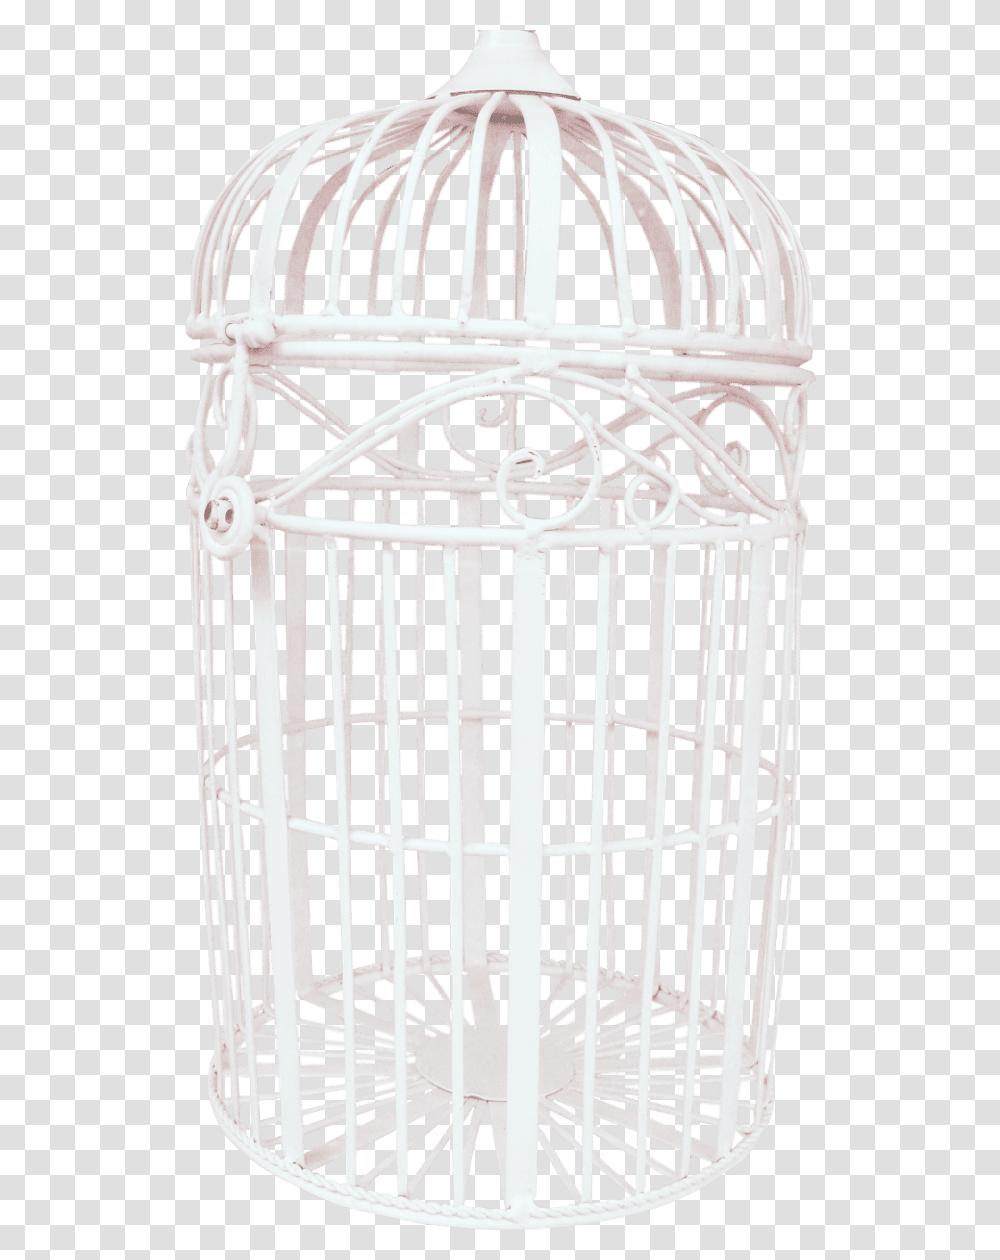 Bird Cage Tube Cage Oiseaux, Furniture, Gate, Chair, Crib Transparent Png